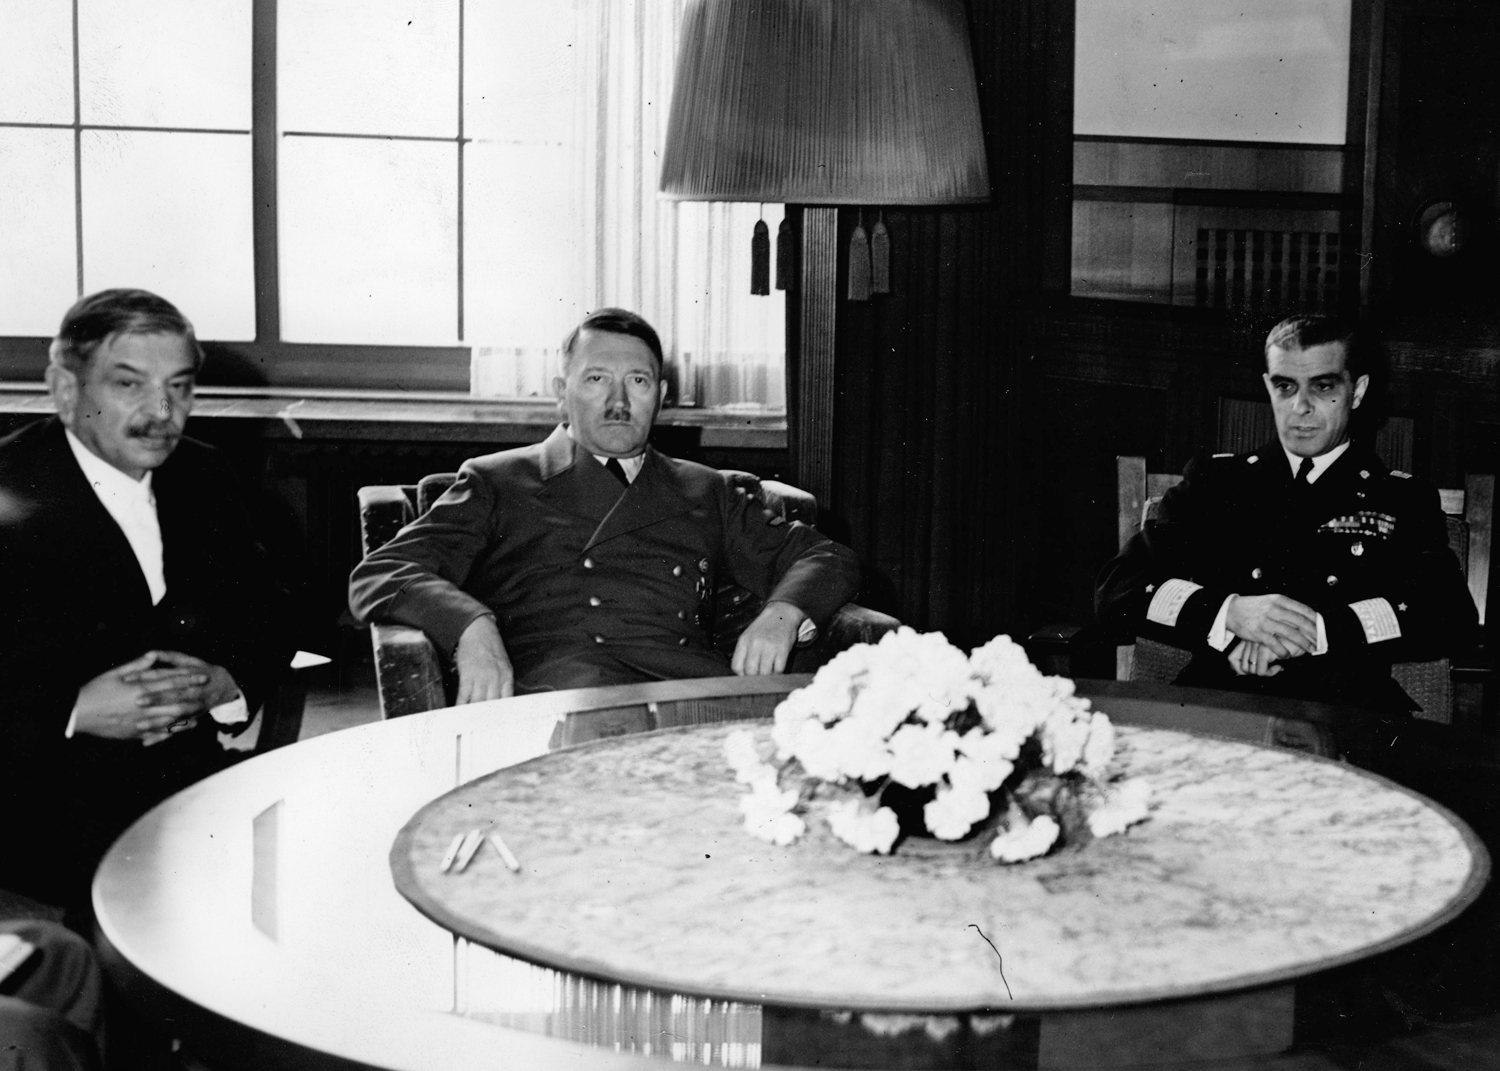 Adolf Hitler at the Berghof with French Prime Minister Pierre Laval and Italian undersecretary of state Giuseppe Bastianini